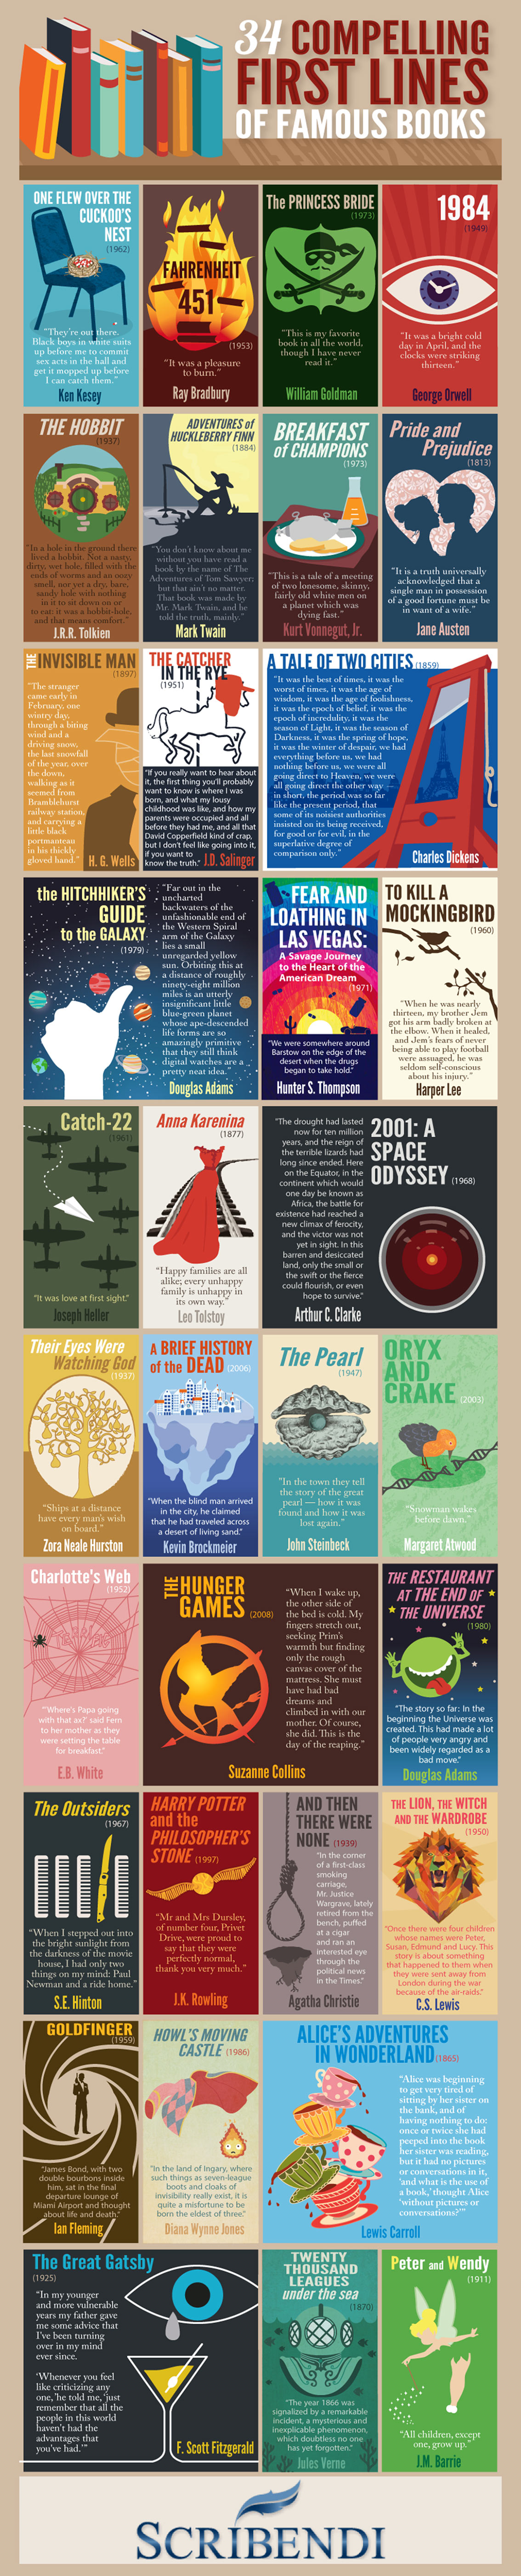 First Lines of Famous Books Infographic